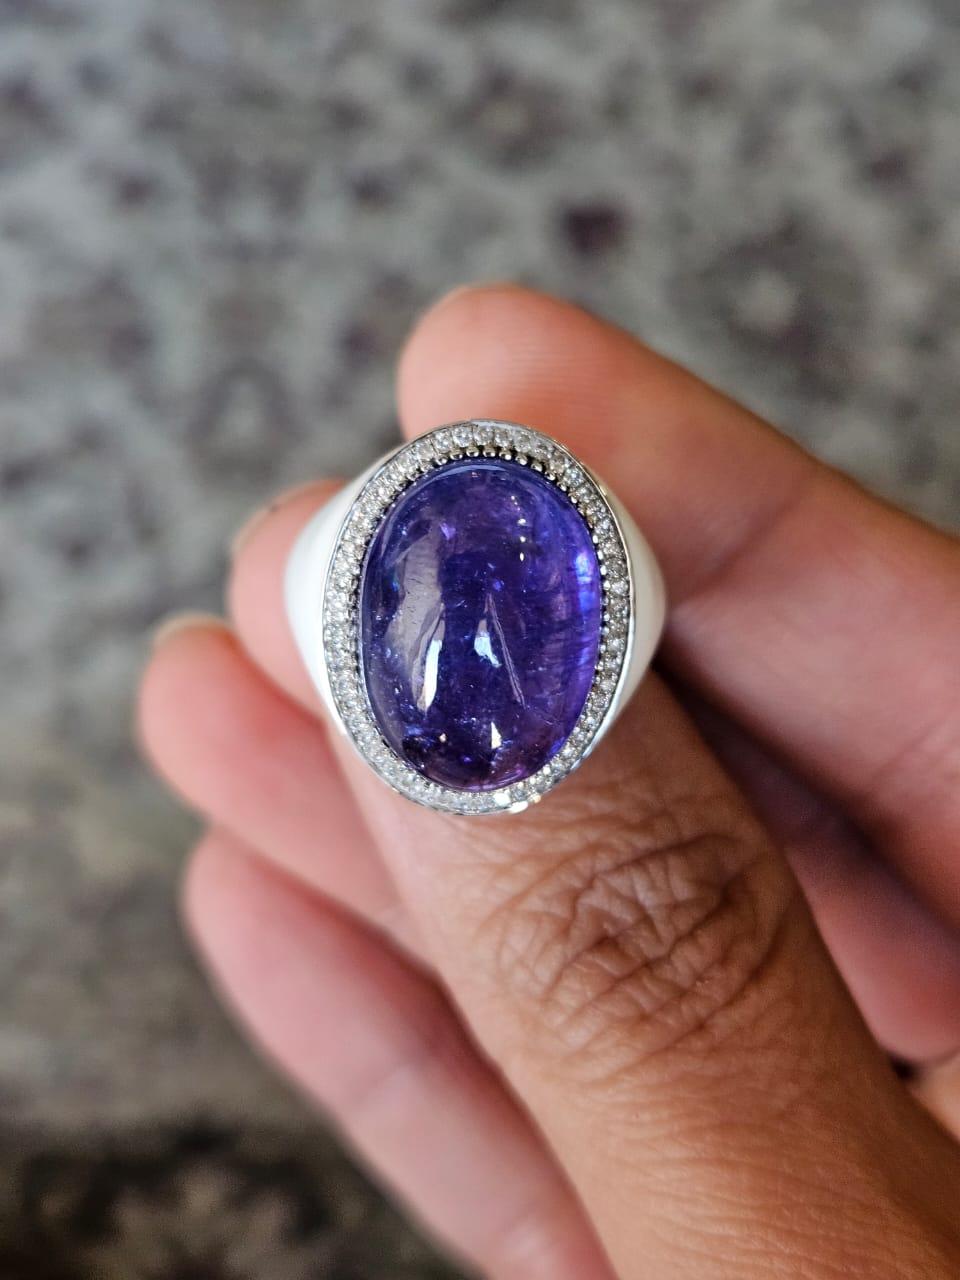 A very beautiful and vintage style, Tanzanite & White Enamel Cocktail Dome Ring set in 18K White Gold & Diamonds. The weight of the Tanzanite Cabochon is 17.39 carats. The Tanzanite is responsibly sourced from Tanzania. The Diamonds weight is 0.26